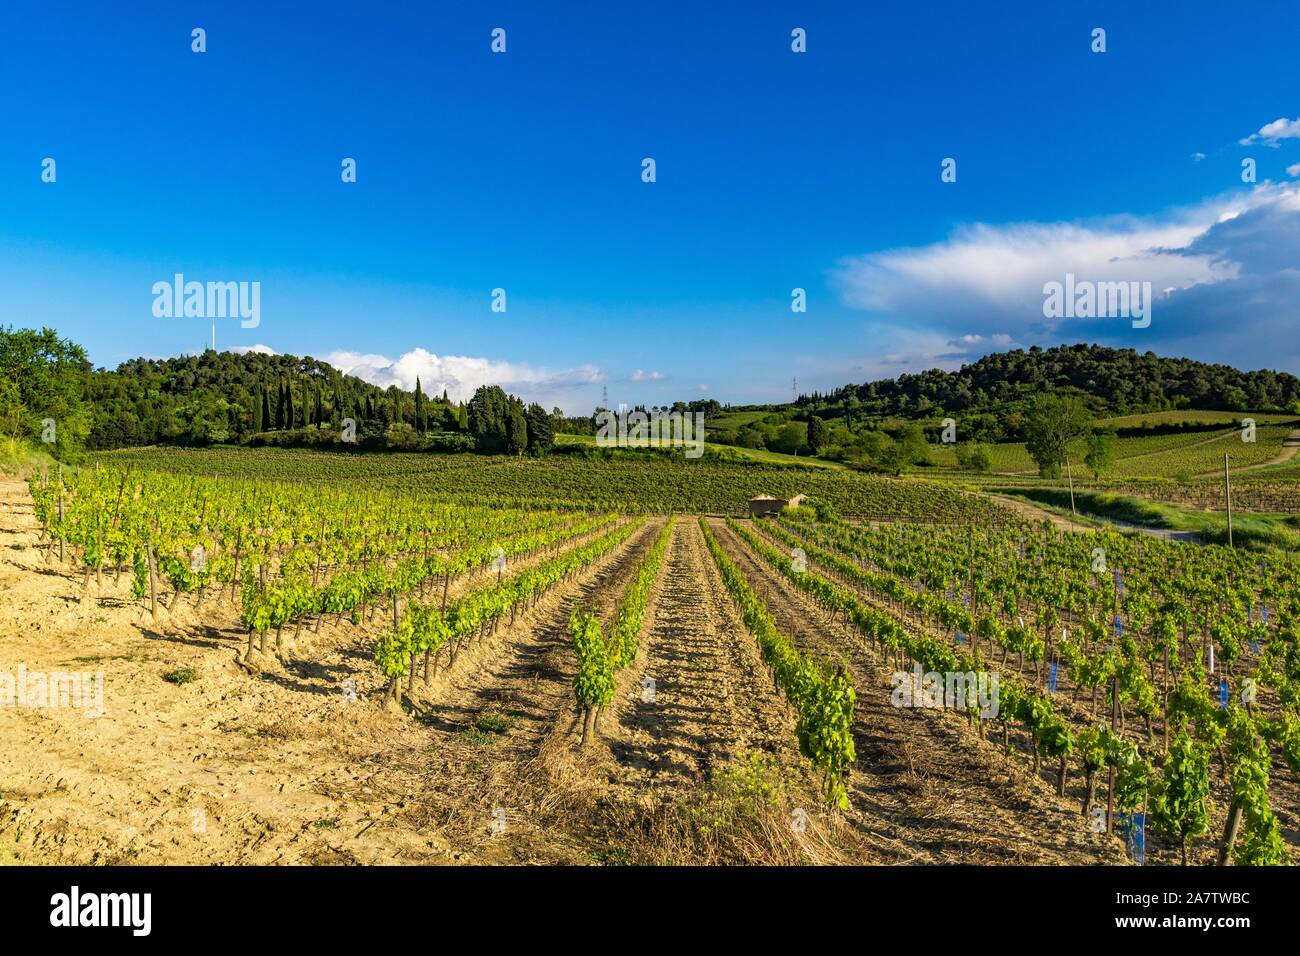 Typical wine region near the town of Carcassonne in Southern France. Stock Photo